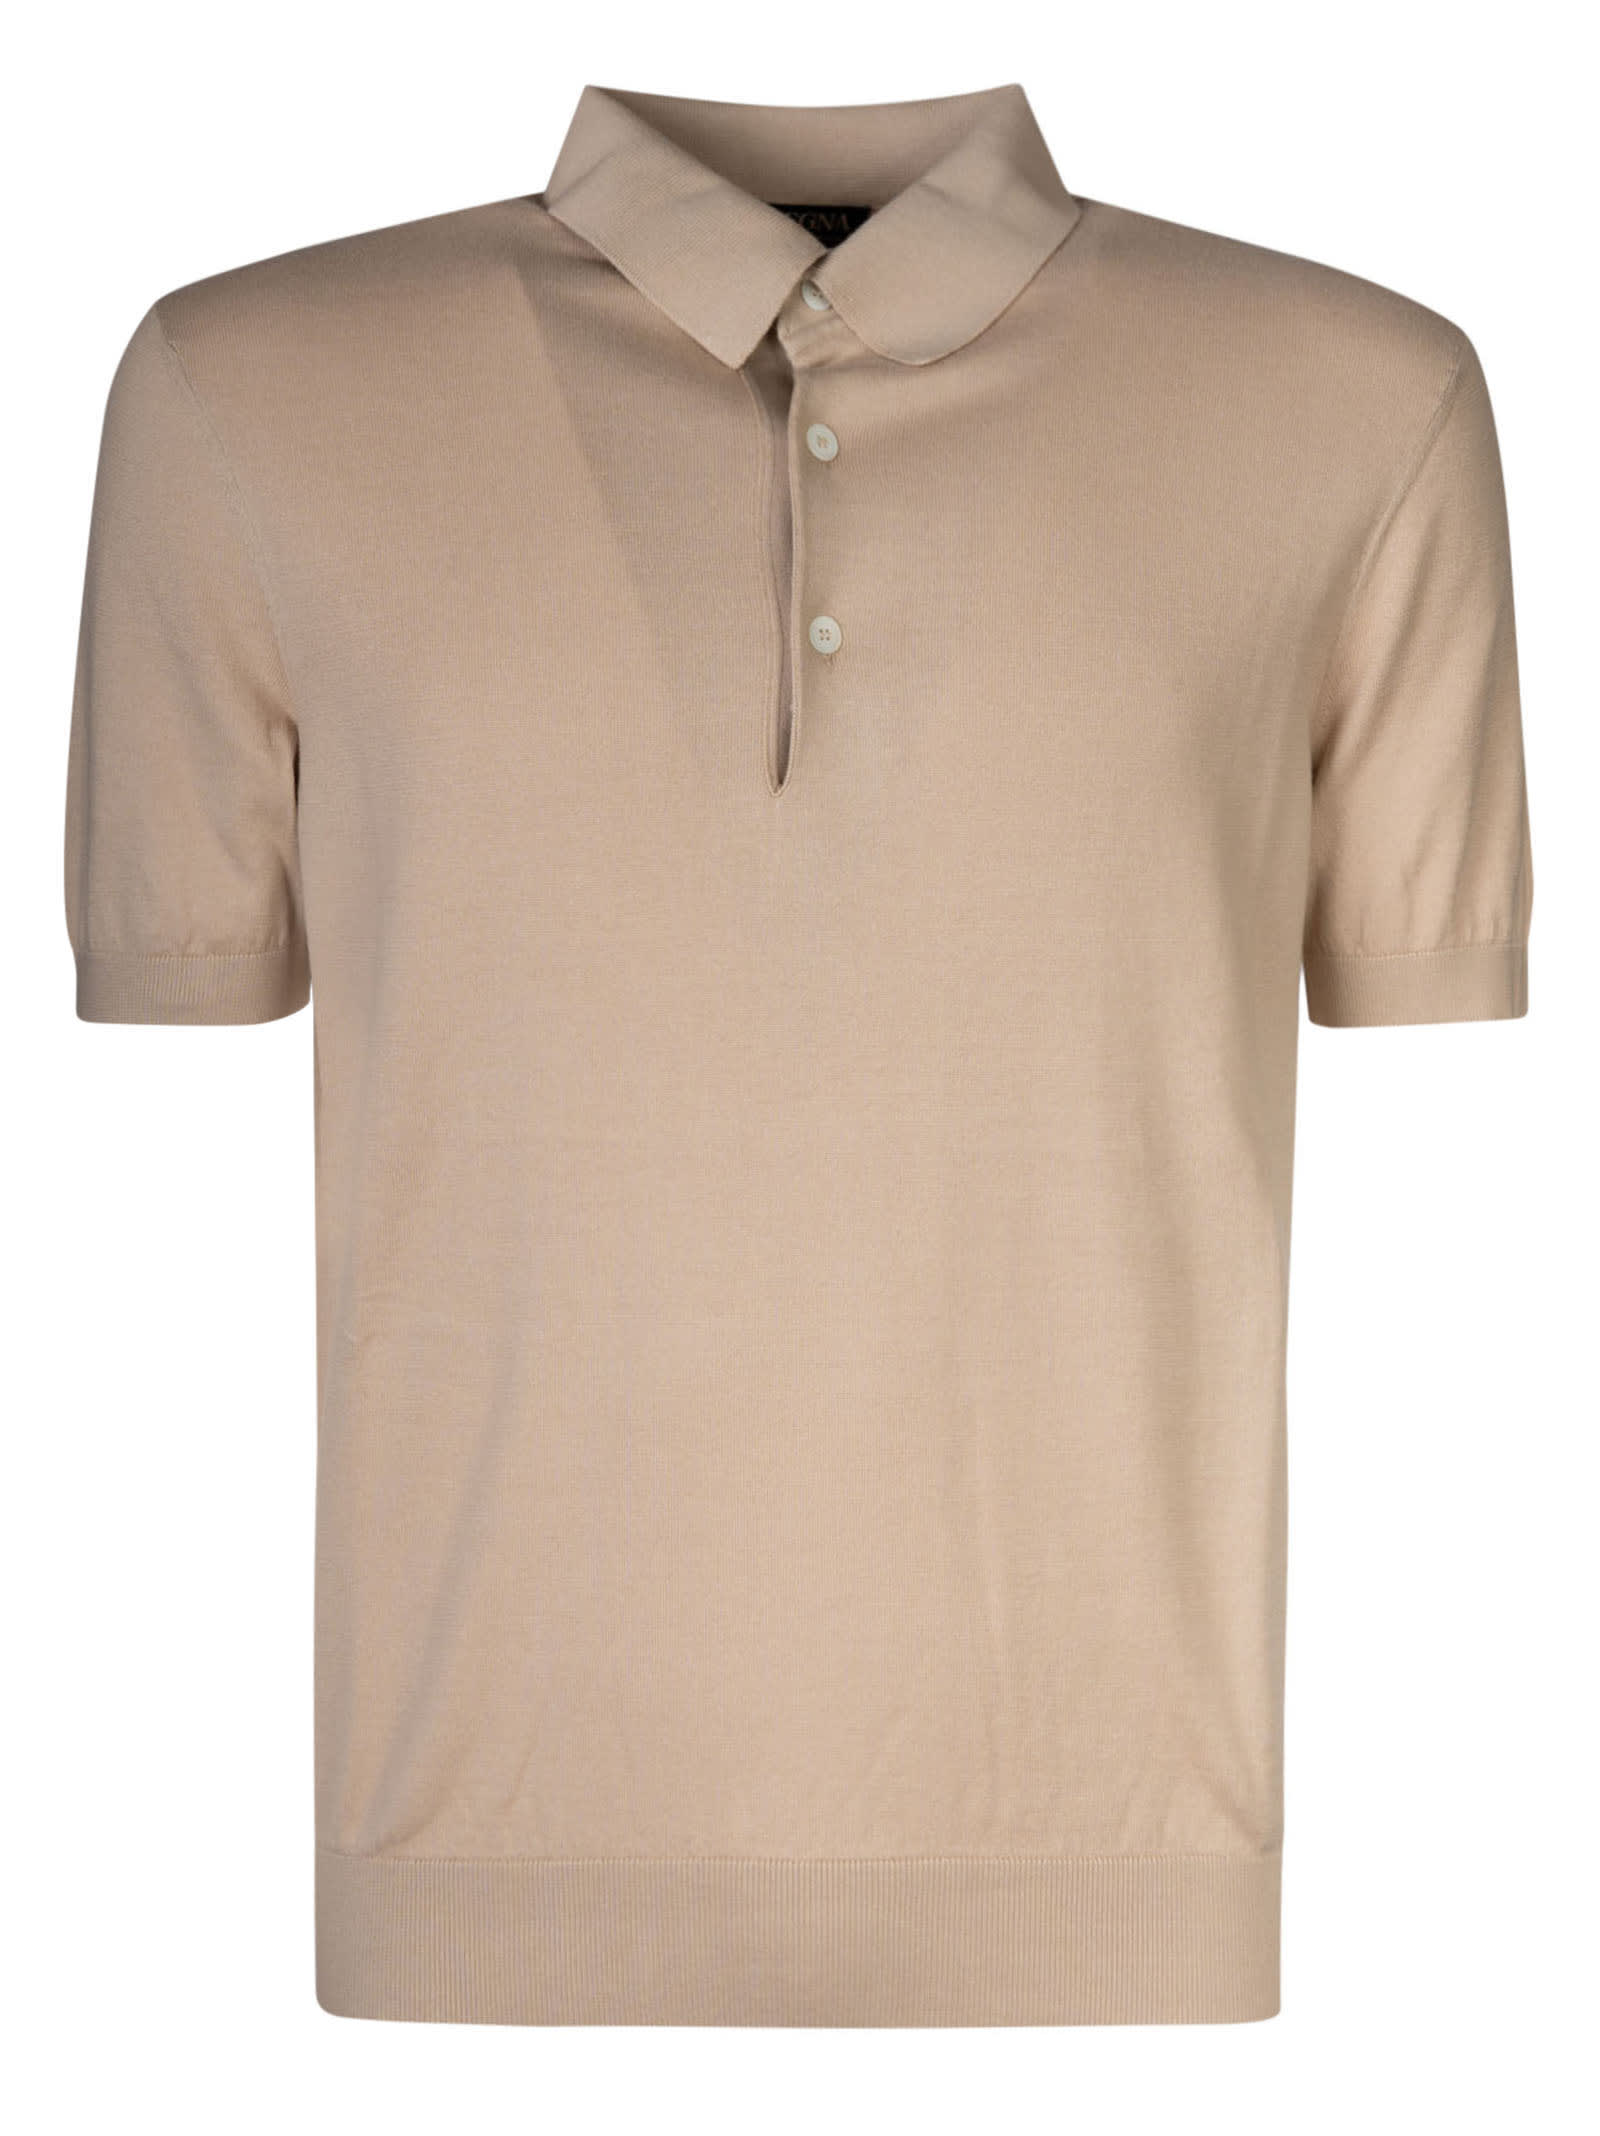 Classic Buttoned Polo Shirt